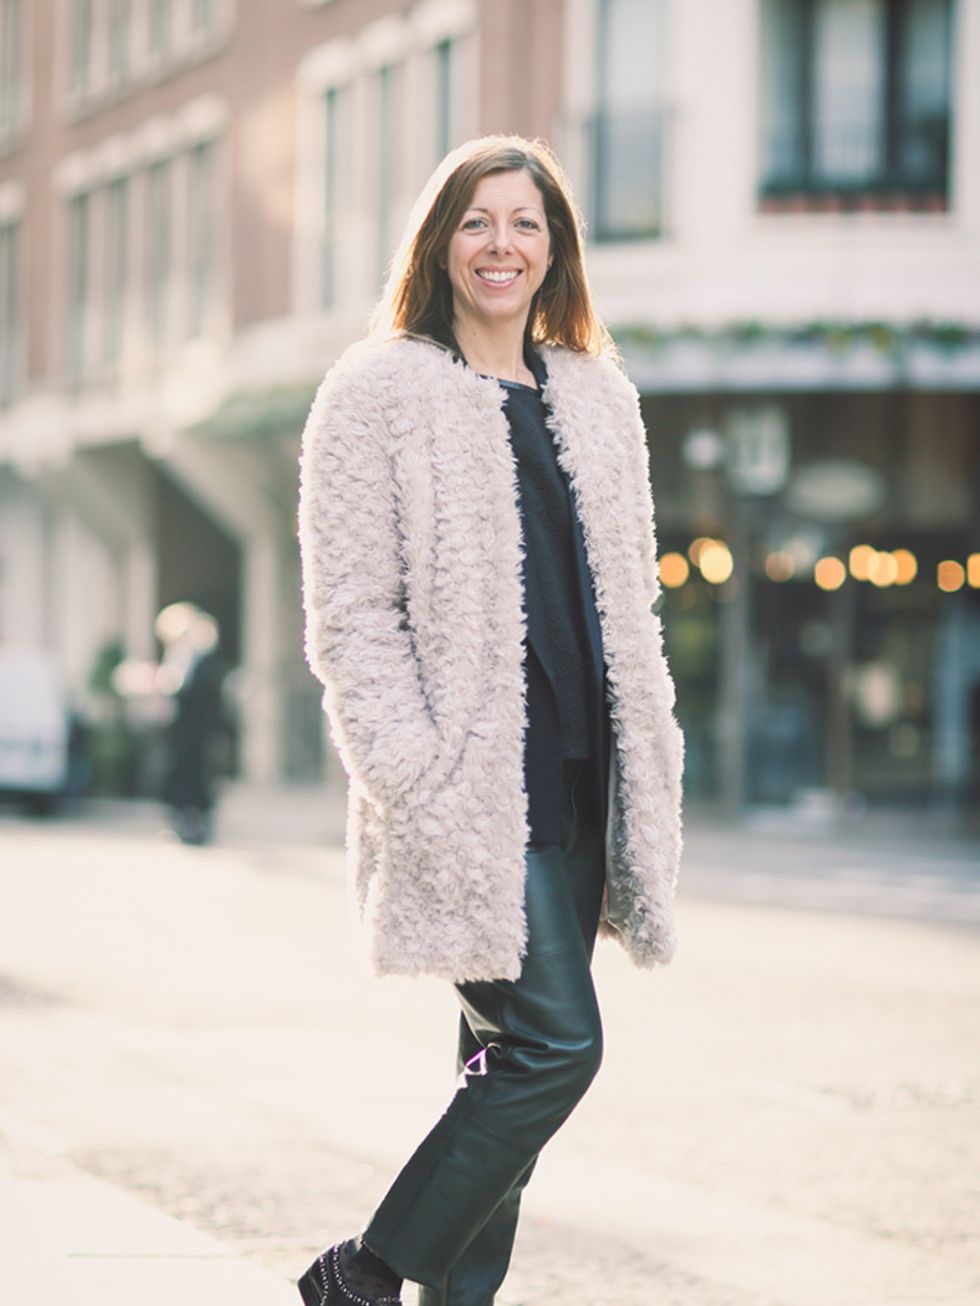 <p>Kirsty Dale  Executive Fashion Director.</p>

<p>Marks and Spencer coat, All Saints jacket, Zara top and leather trousers, Church's shoes.</p>